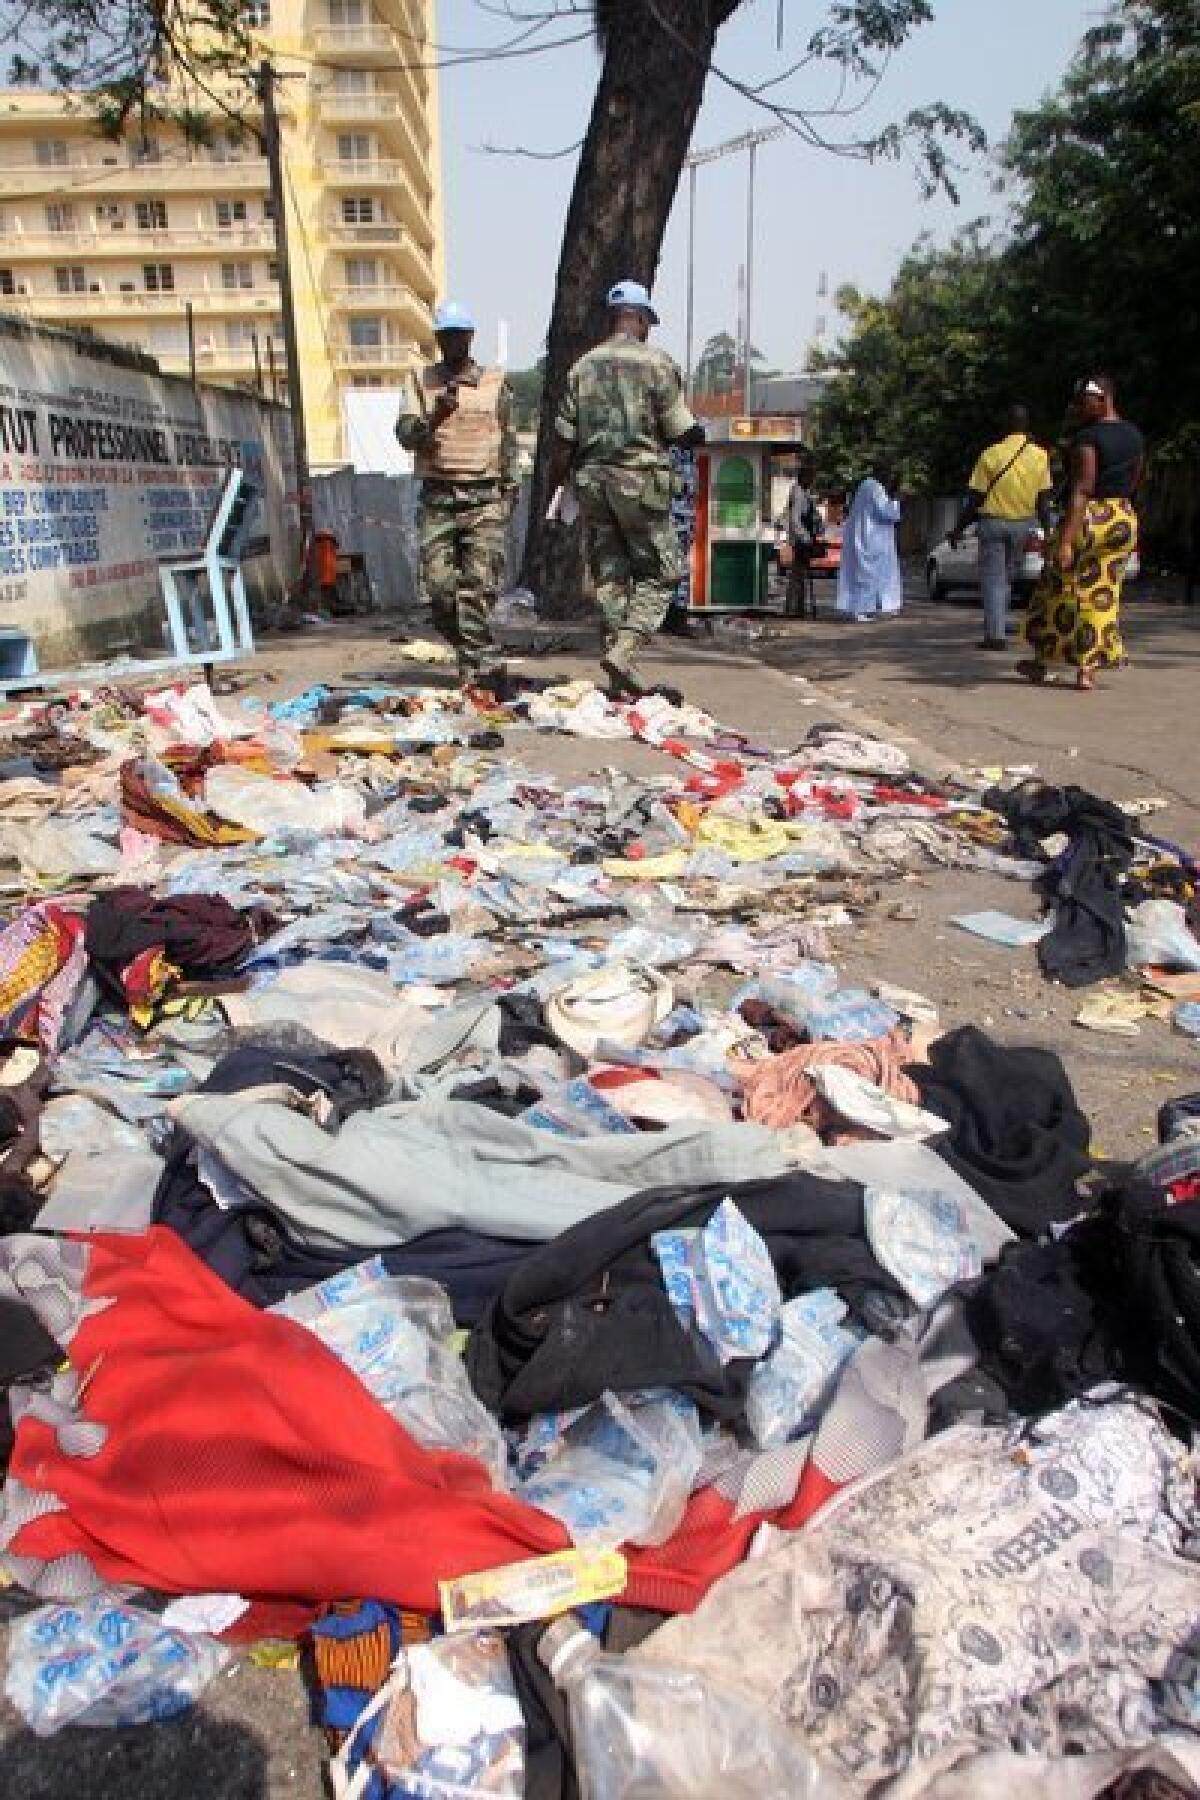 U.N. peacekeepers stand next to shoes and other items lying on the pavement at the scene of a stampede in Abidjan, Ivory Coast, on Tuesday.